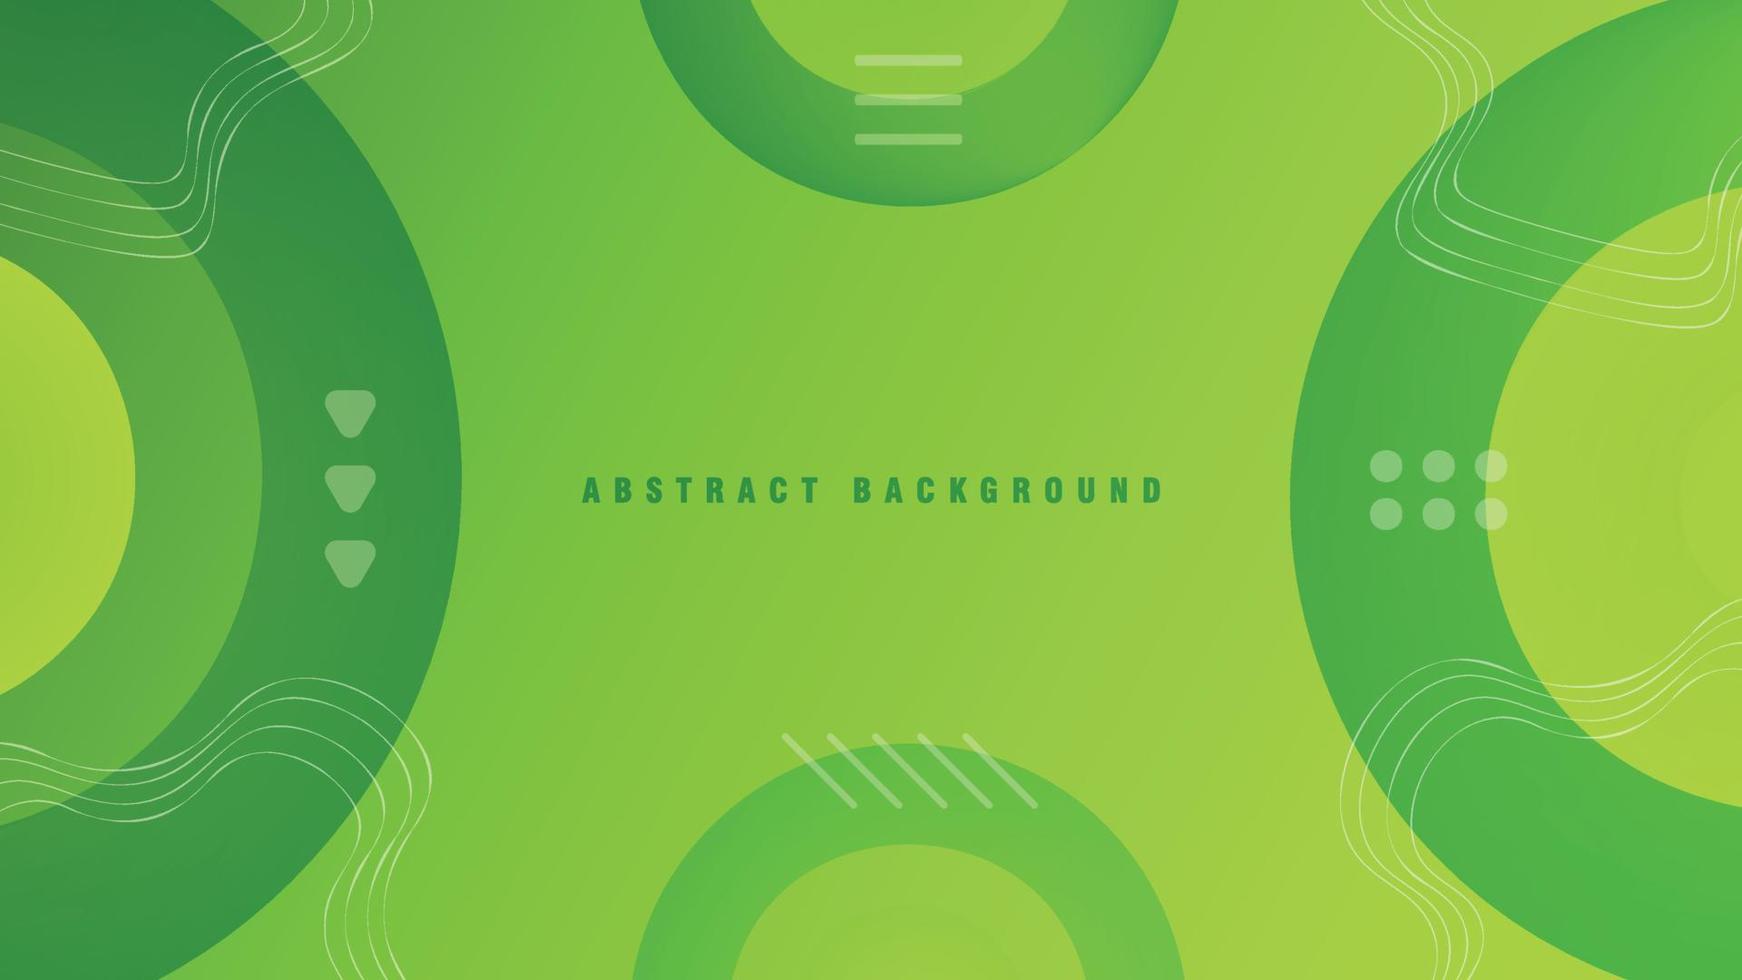 Green vector layout with circle shapes. Abstract background with colorful gradient.